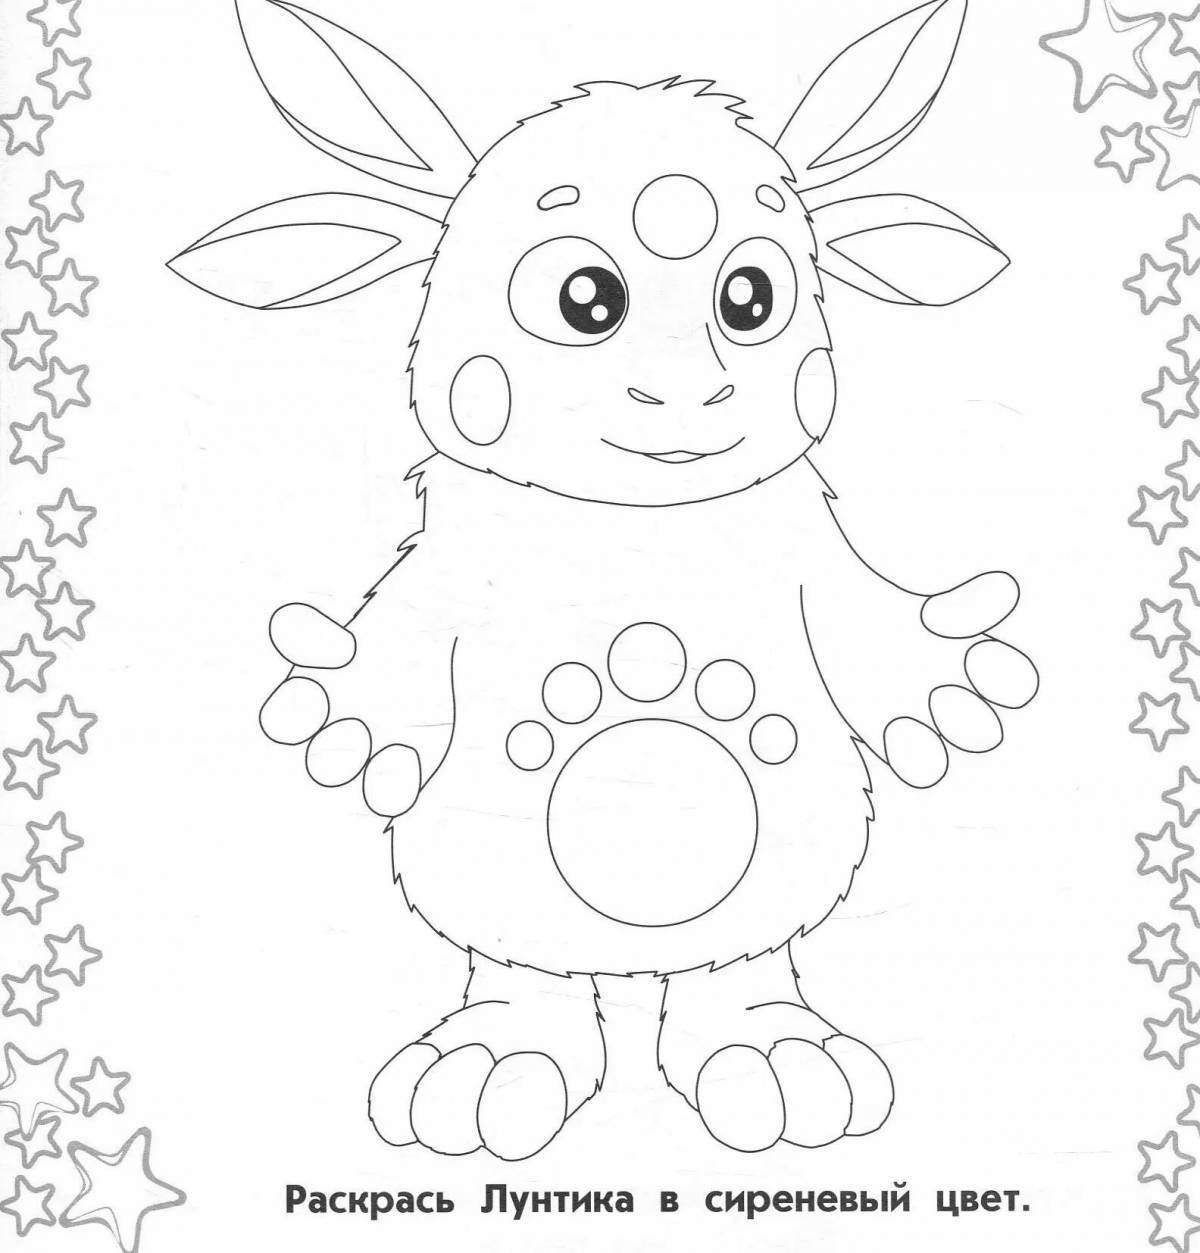 A fascinating Christmas coloring book for Luntik